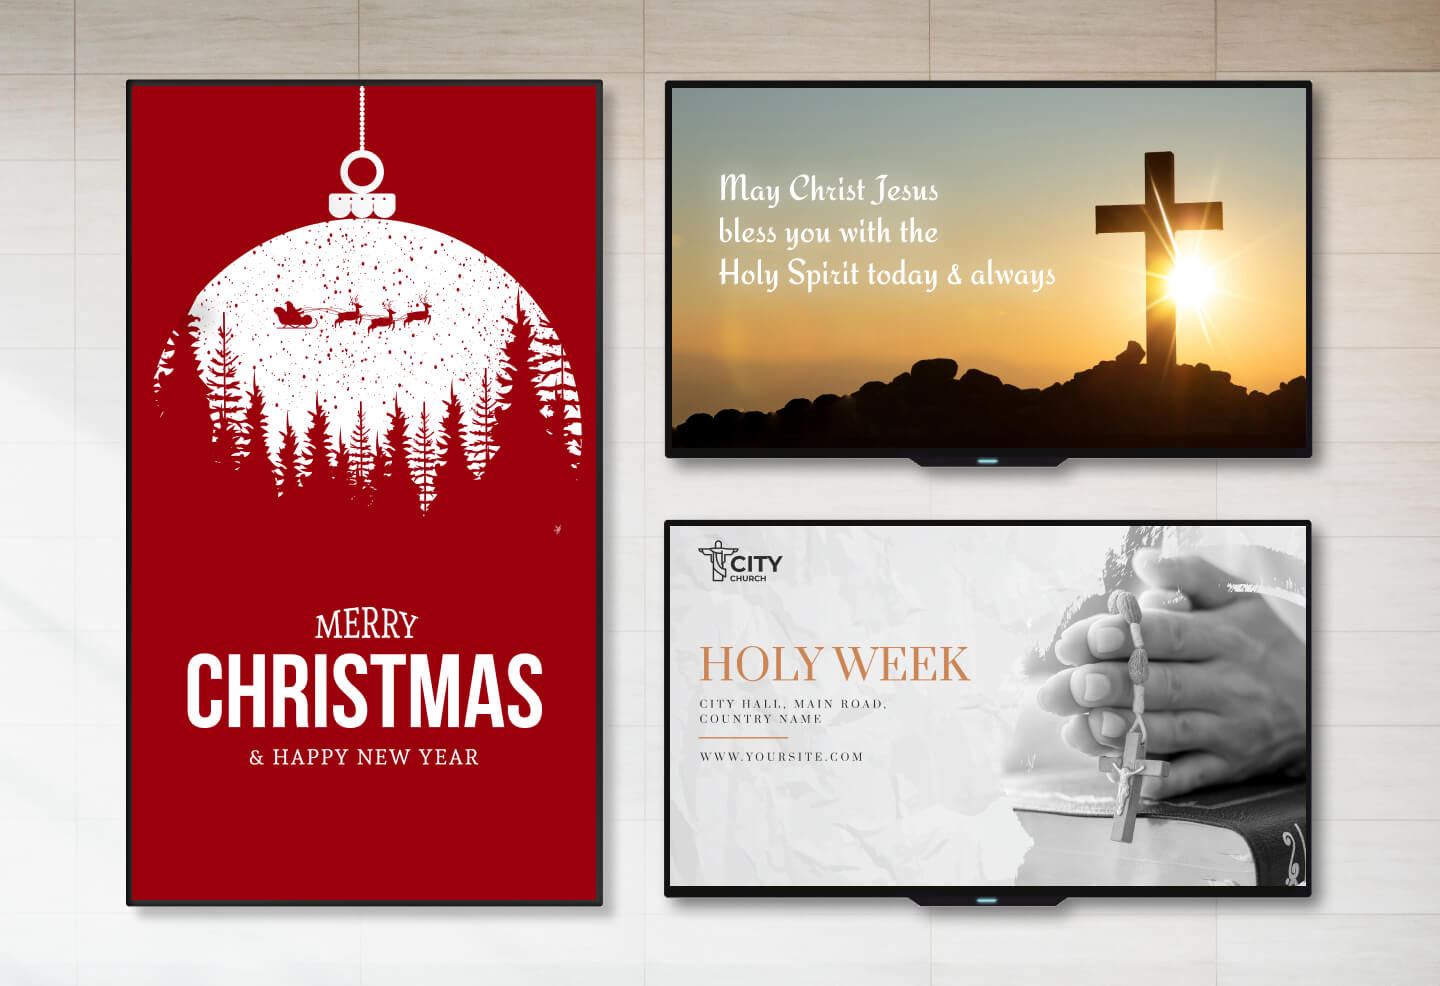 use cases of church digital signage